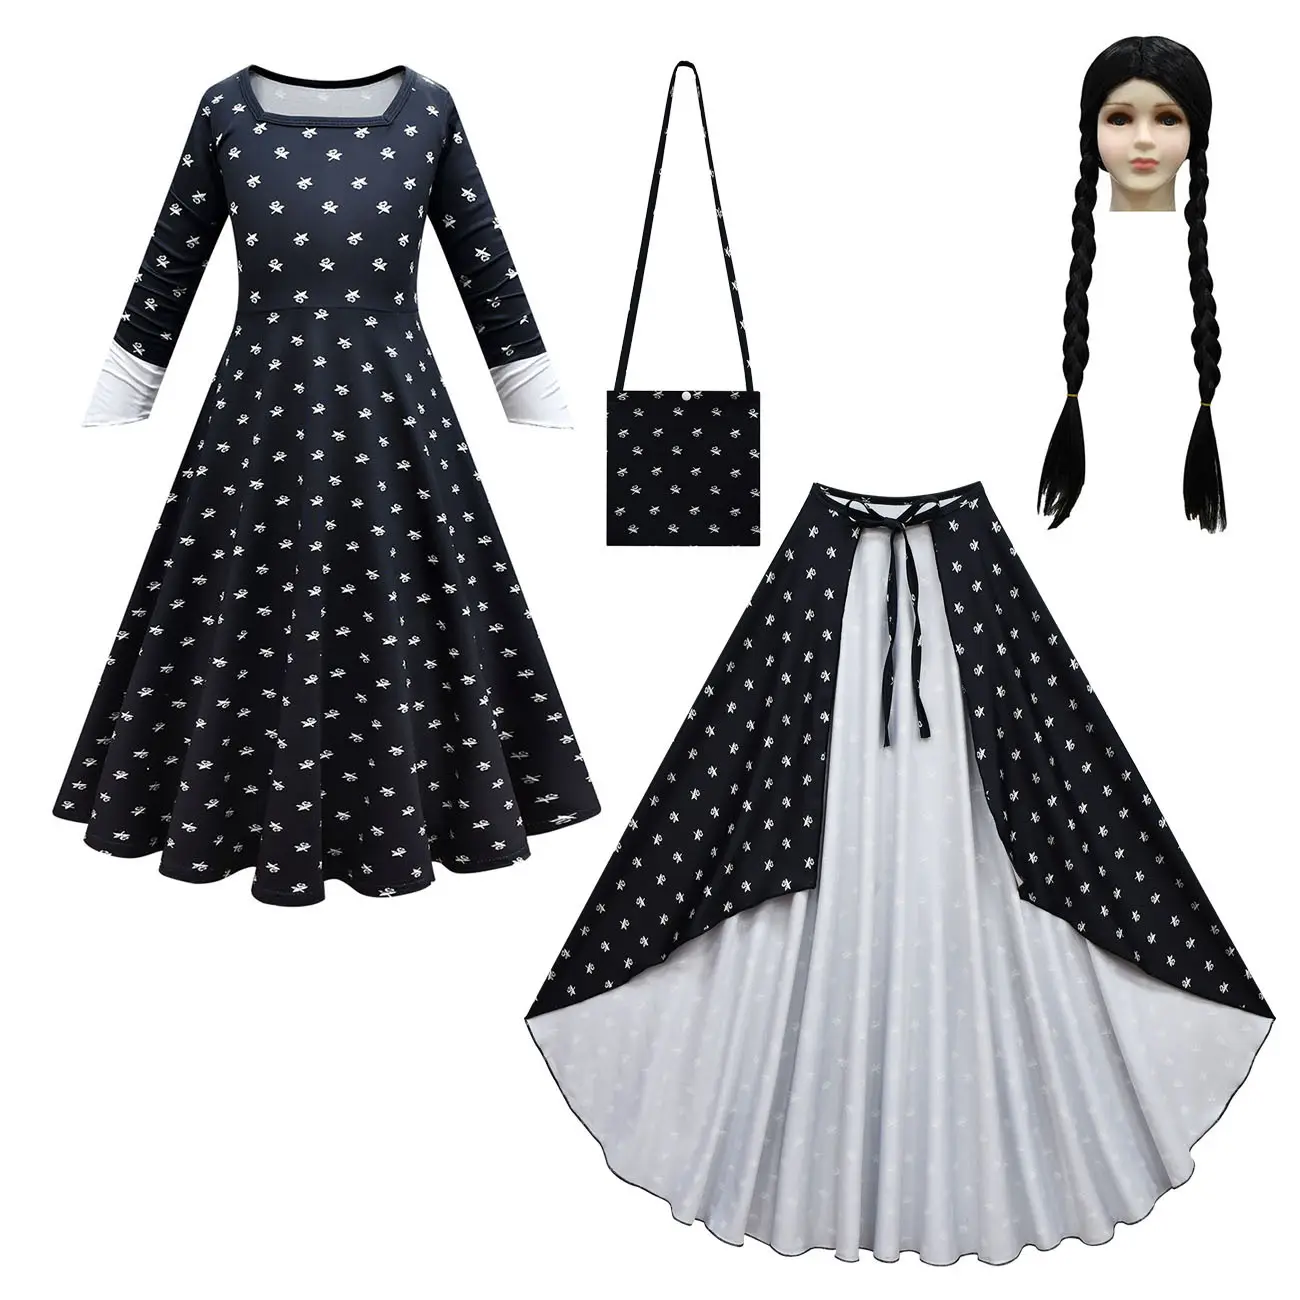 New Adams Family Cosplay Costume Wednesday Adams Floral Dress for Girls 3-12 anni Gothic Black Party Dress Kids Comic Con Outfit